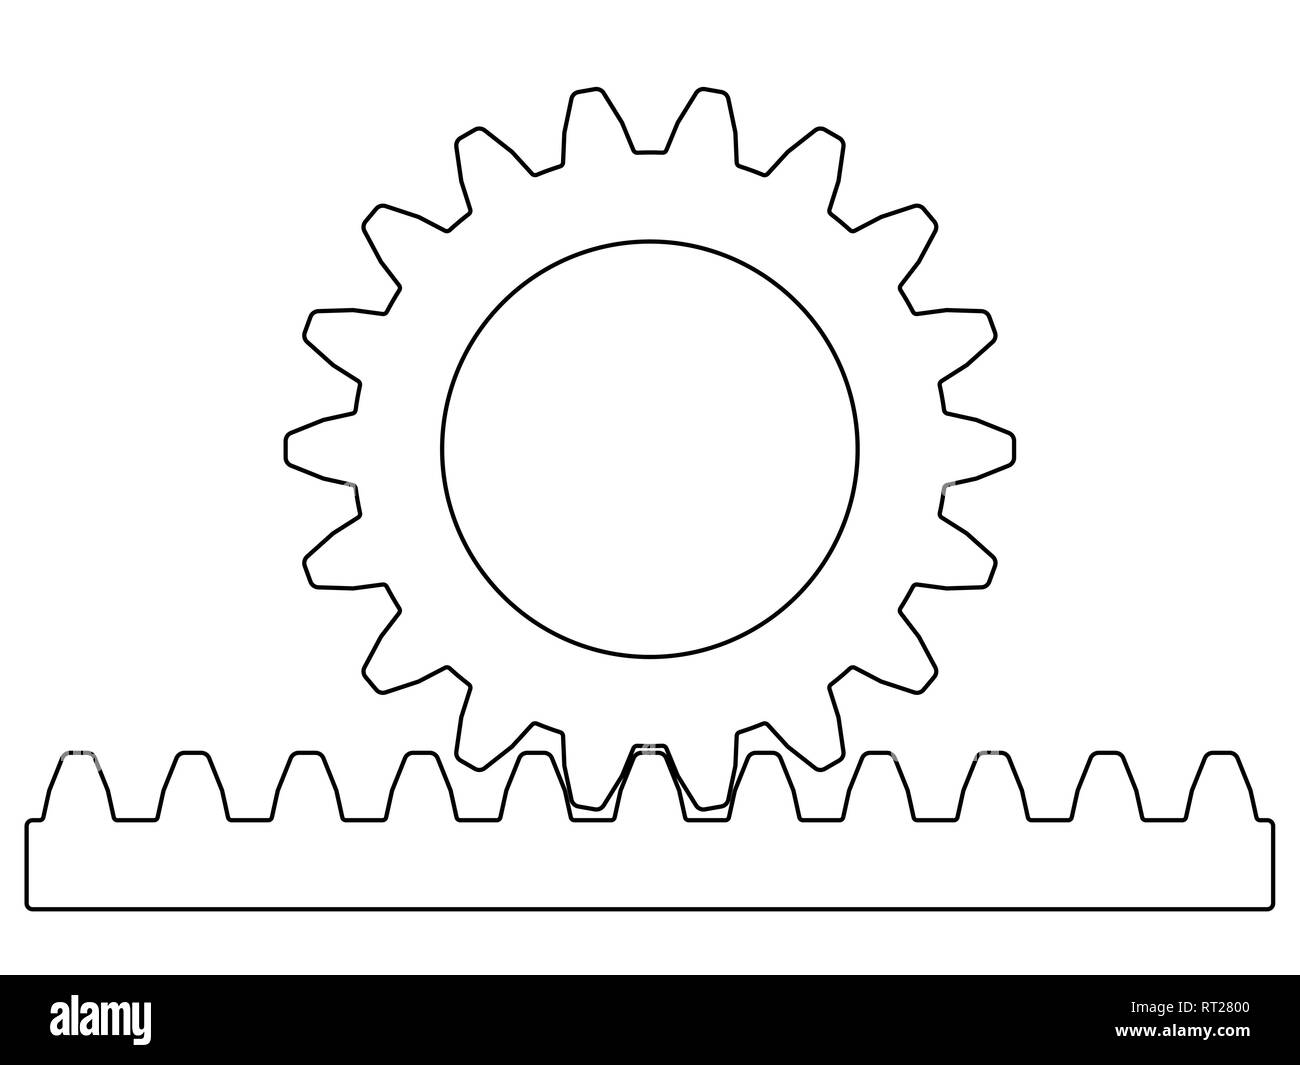 Illustration of the rack pinion gear transmission Stock Vector